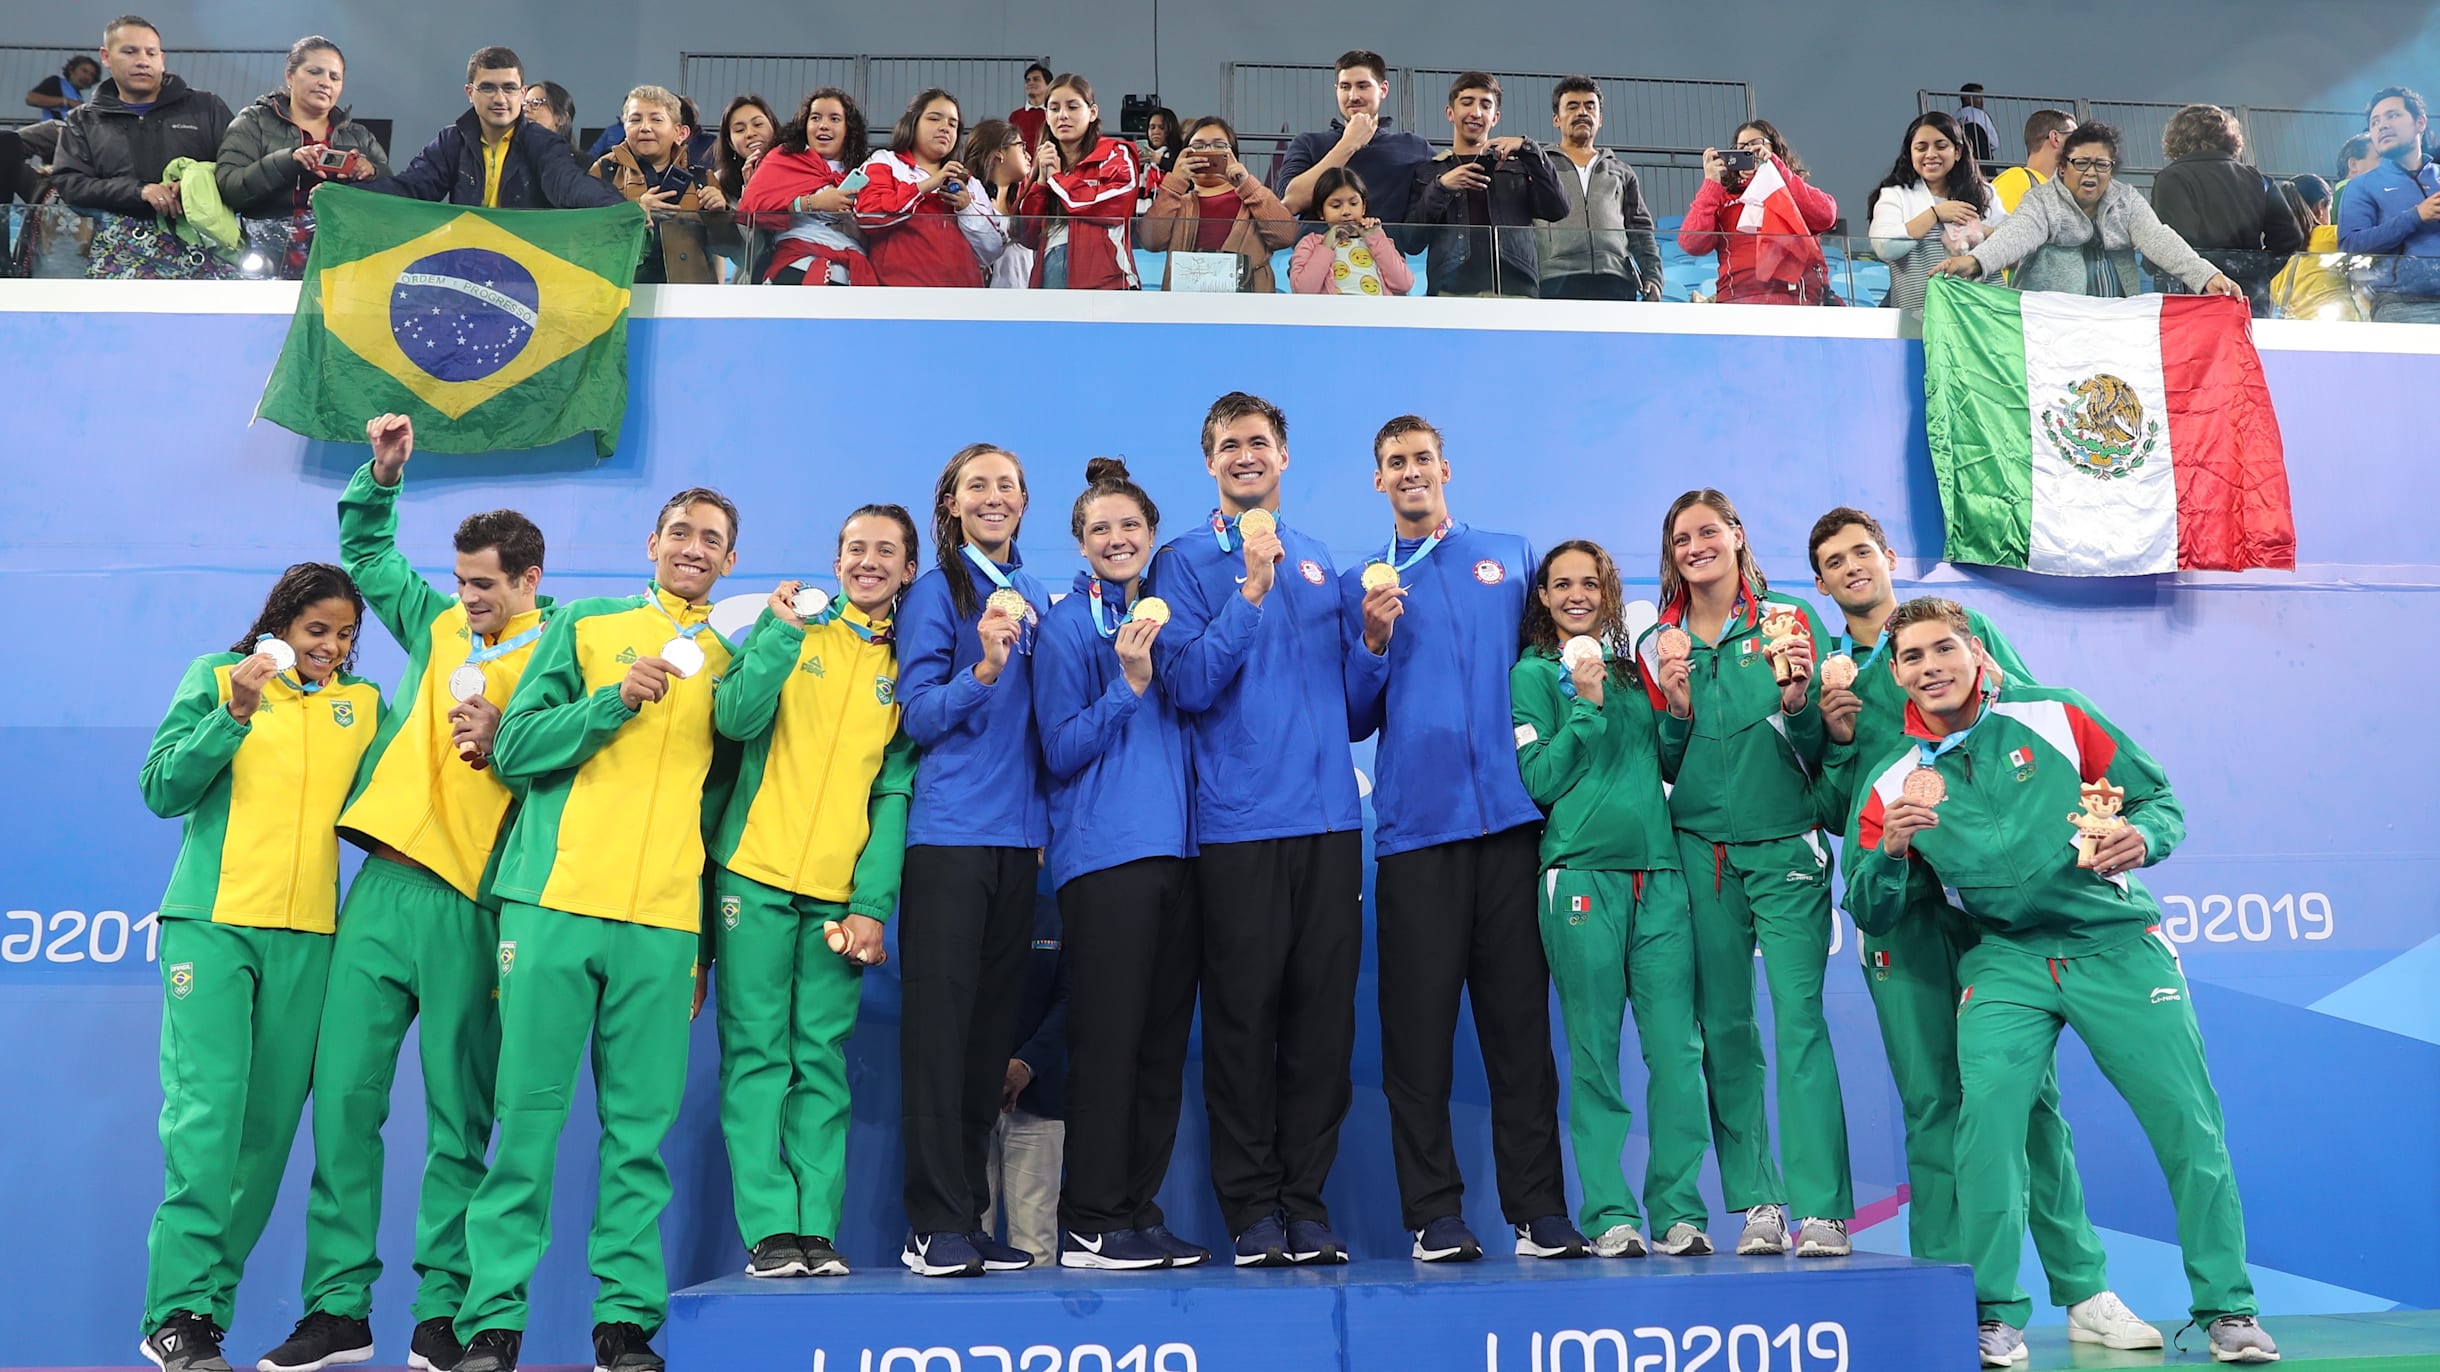 US Youth Team Breaks Medal Record In Brazil!